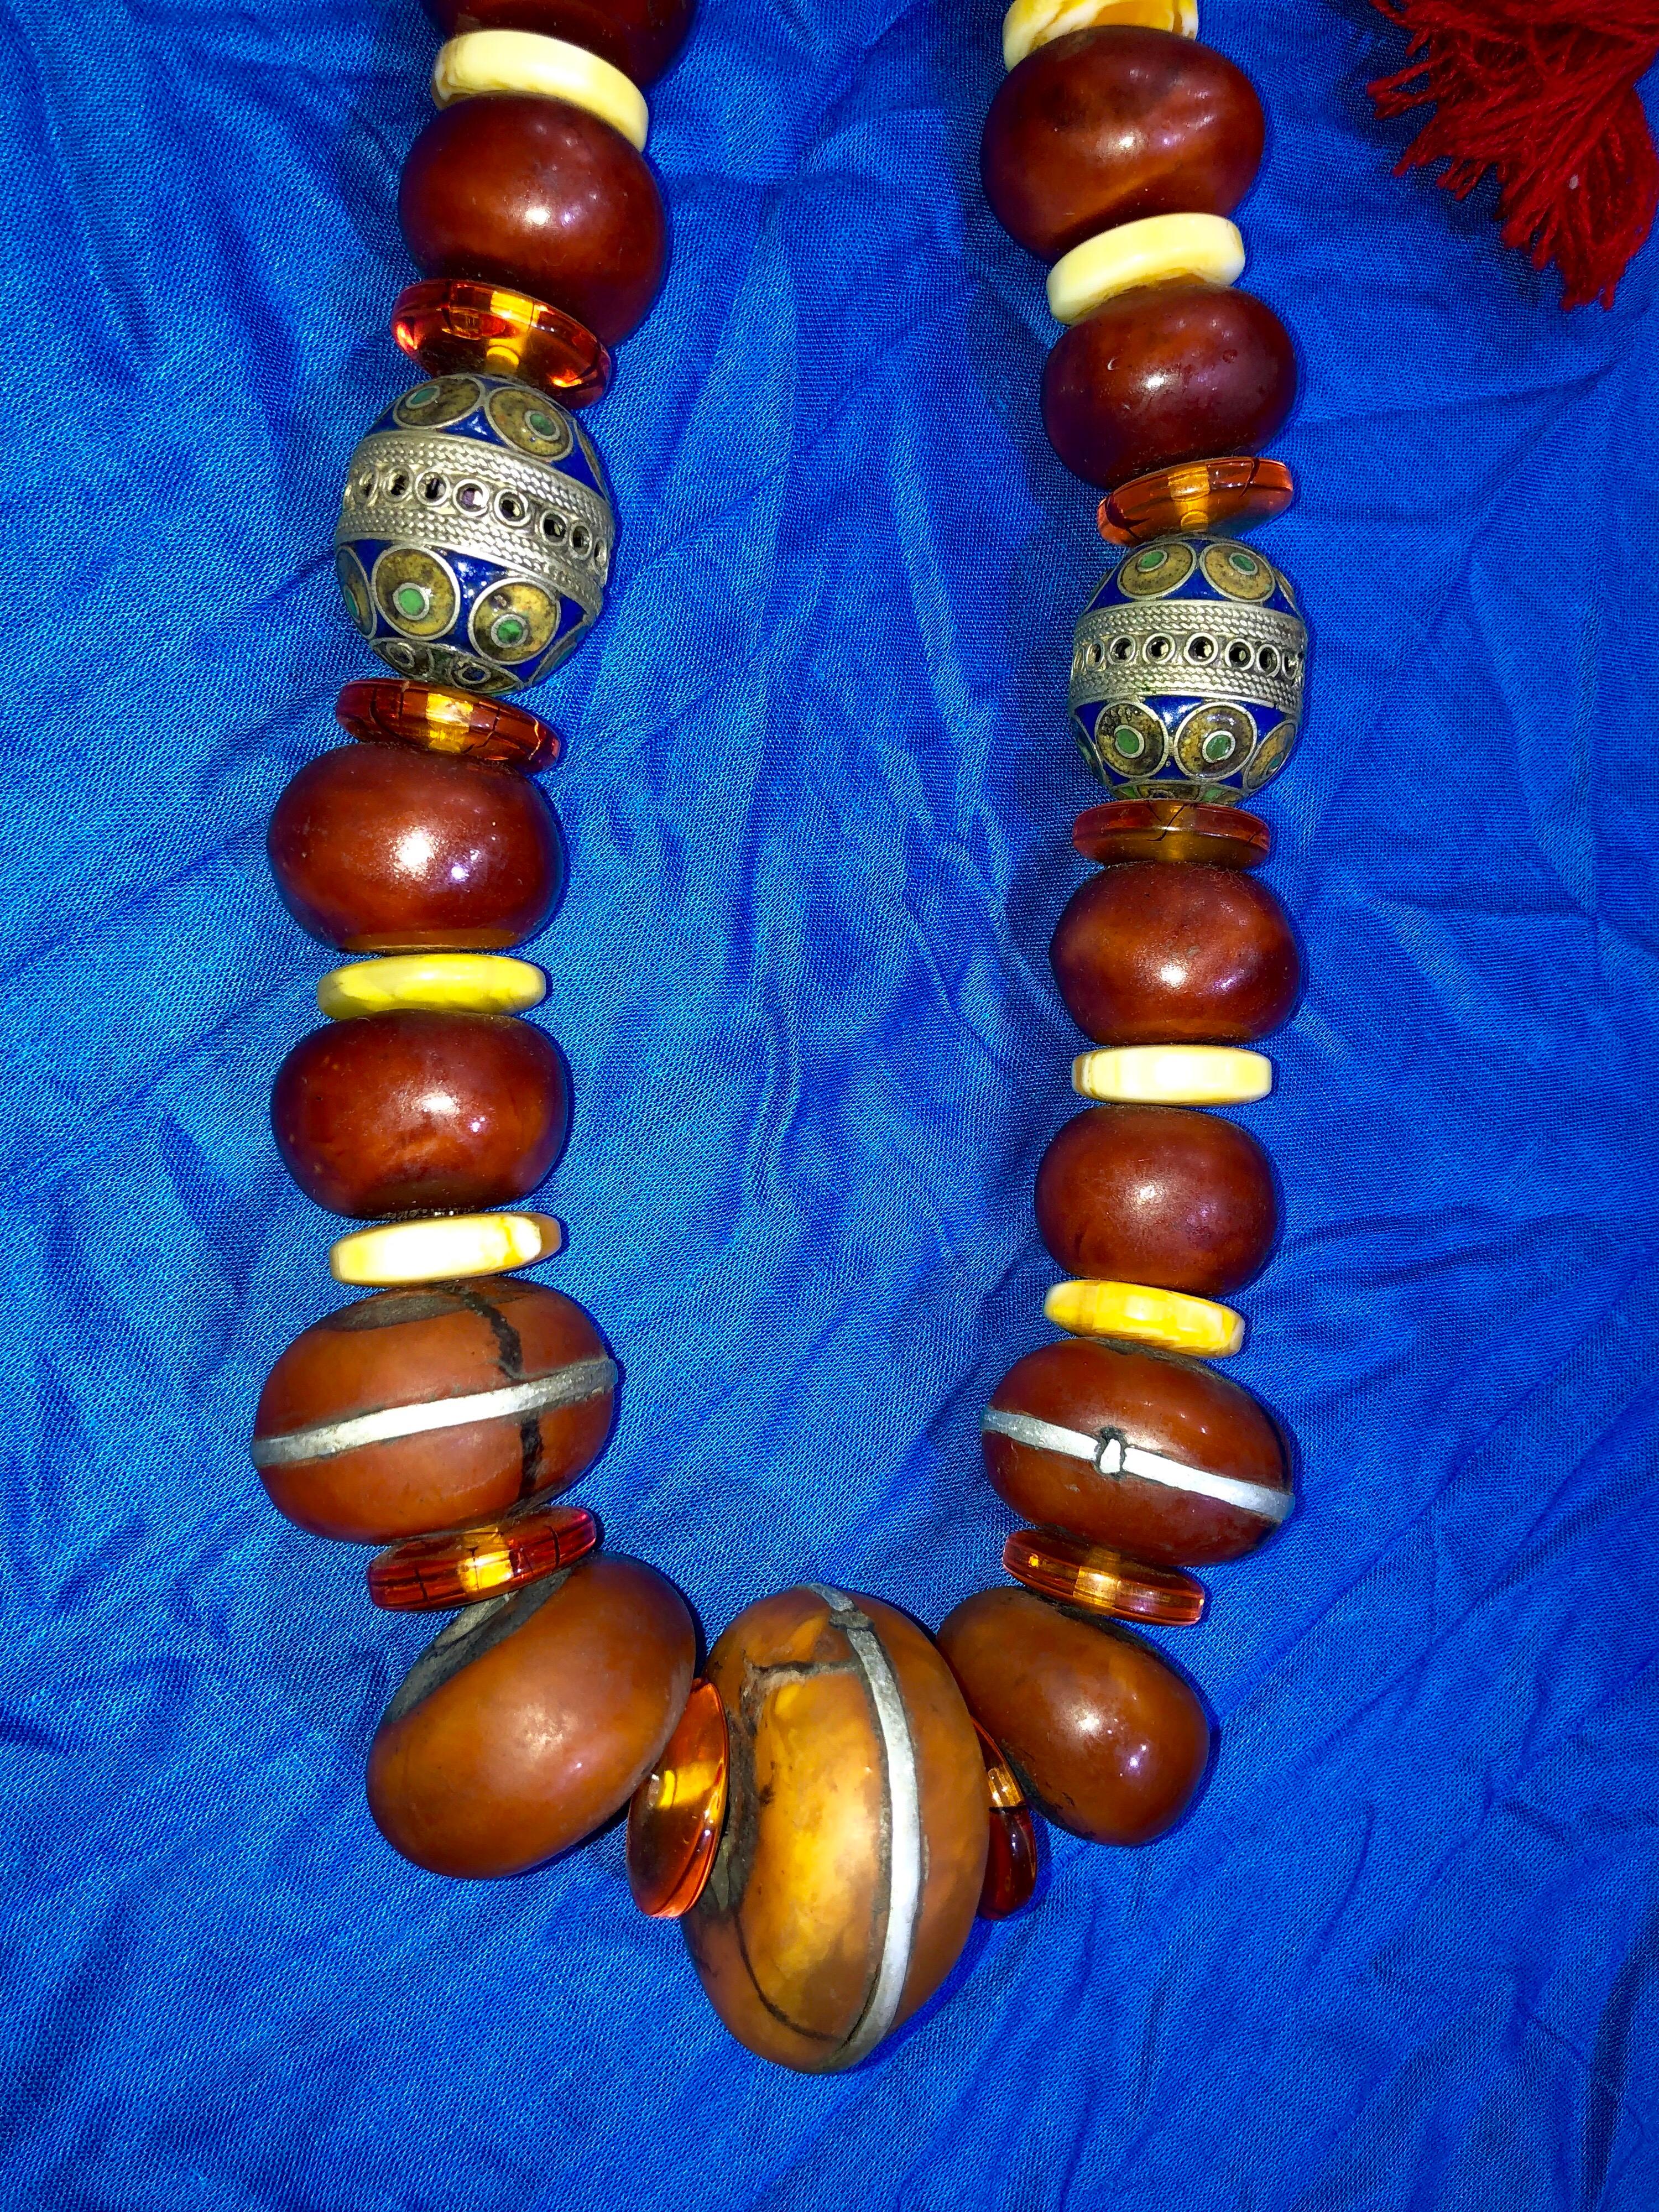 This Berber Wedding and Fertility necklace was crafted for a Moroccan Bride to wear on her wedding day. It features two enameled Tagemout fertility beads and a mix of Amber resin beads. In addition there are Amazonite beads and shells.

Tagemout